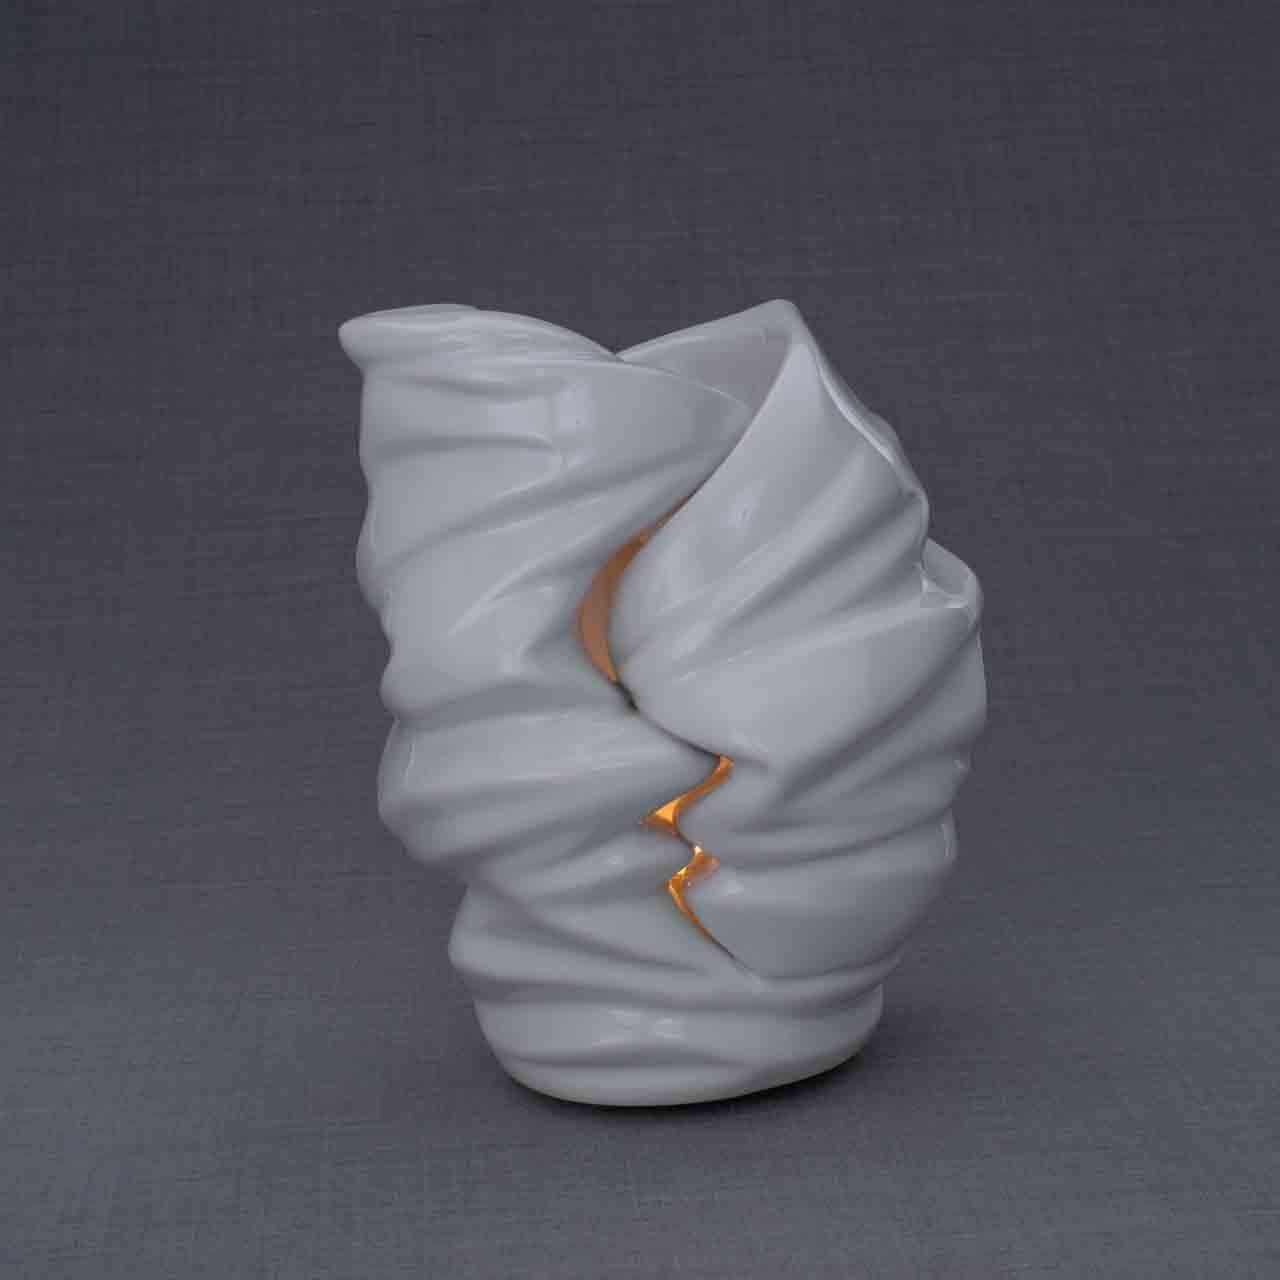 Light Adult Cremation Urn for Ashes in White